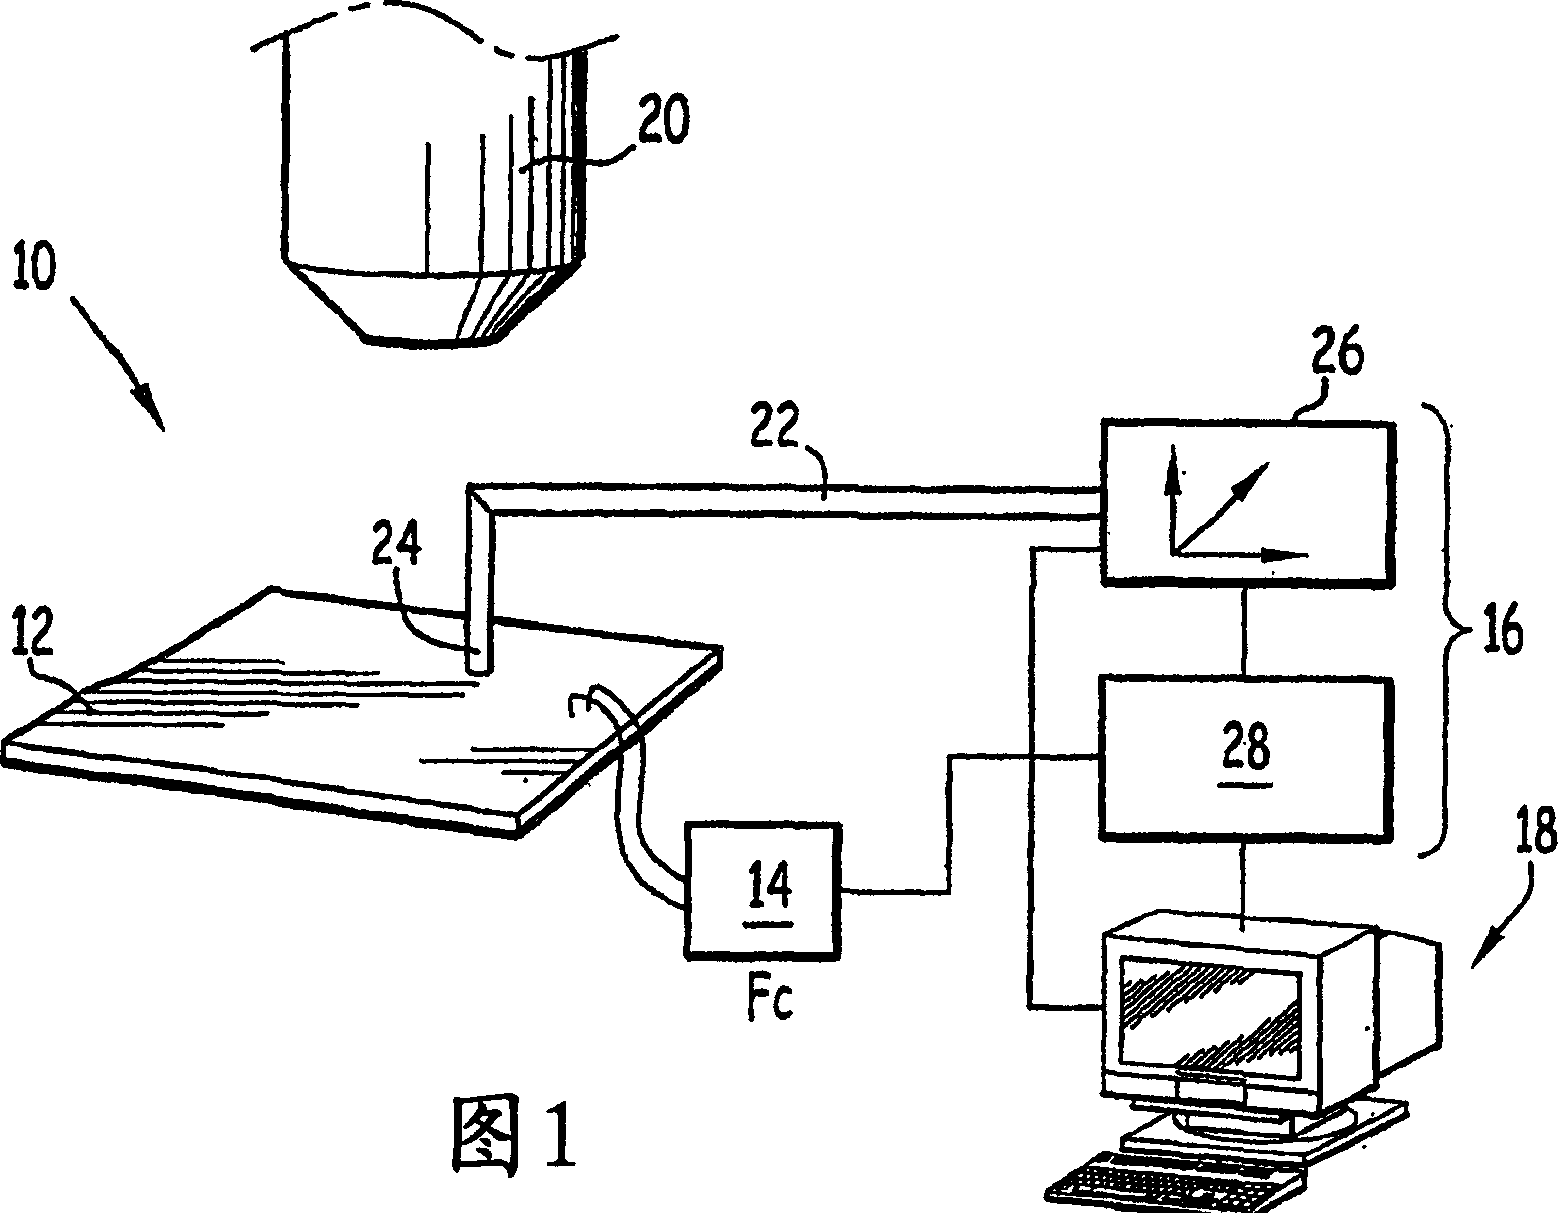 Magnetic-field-measuring device